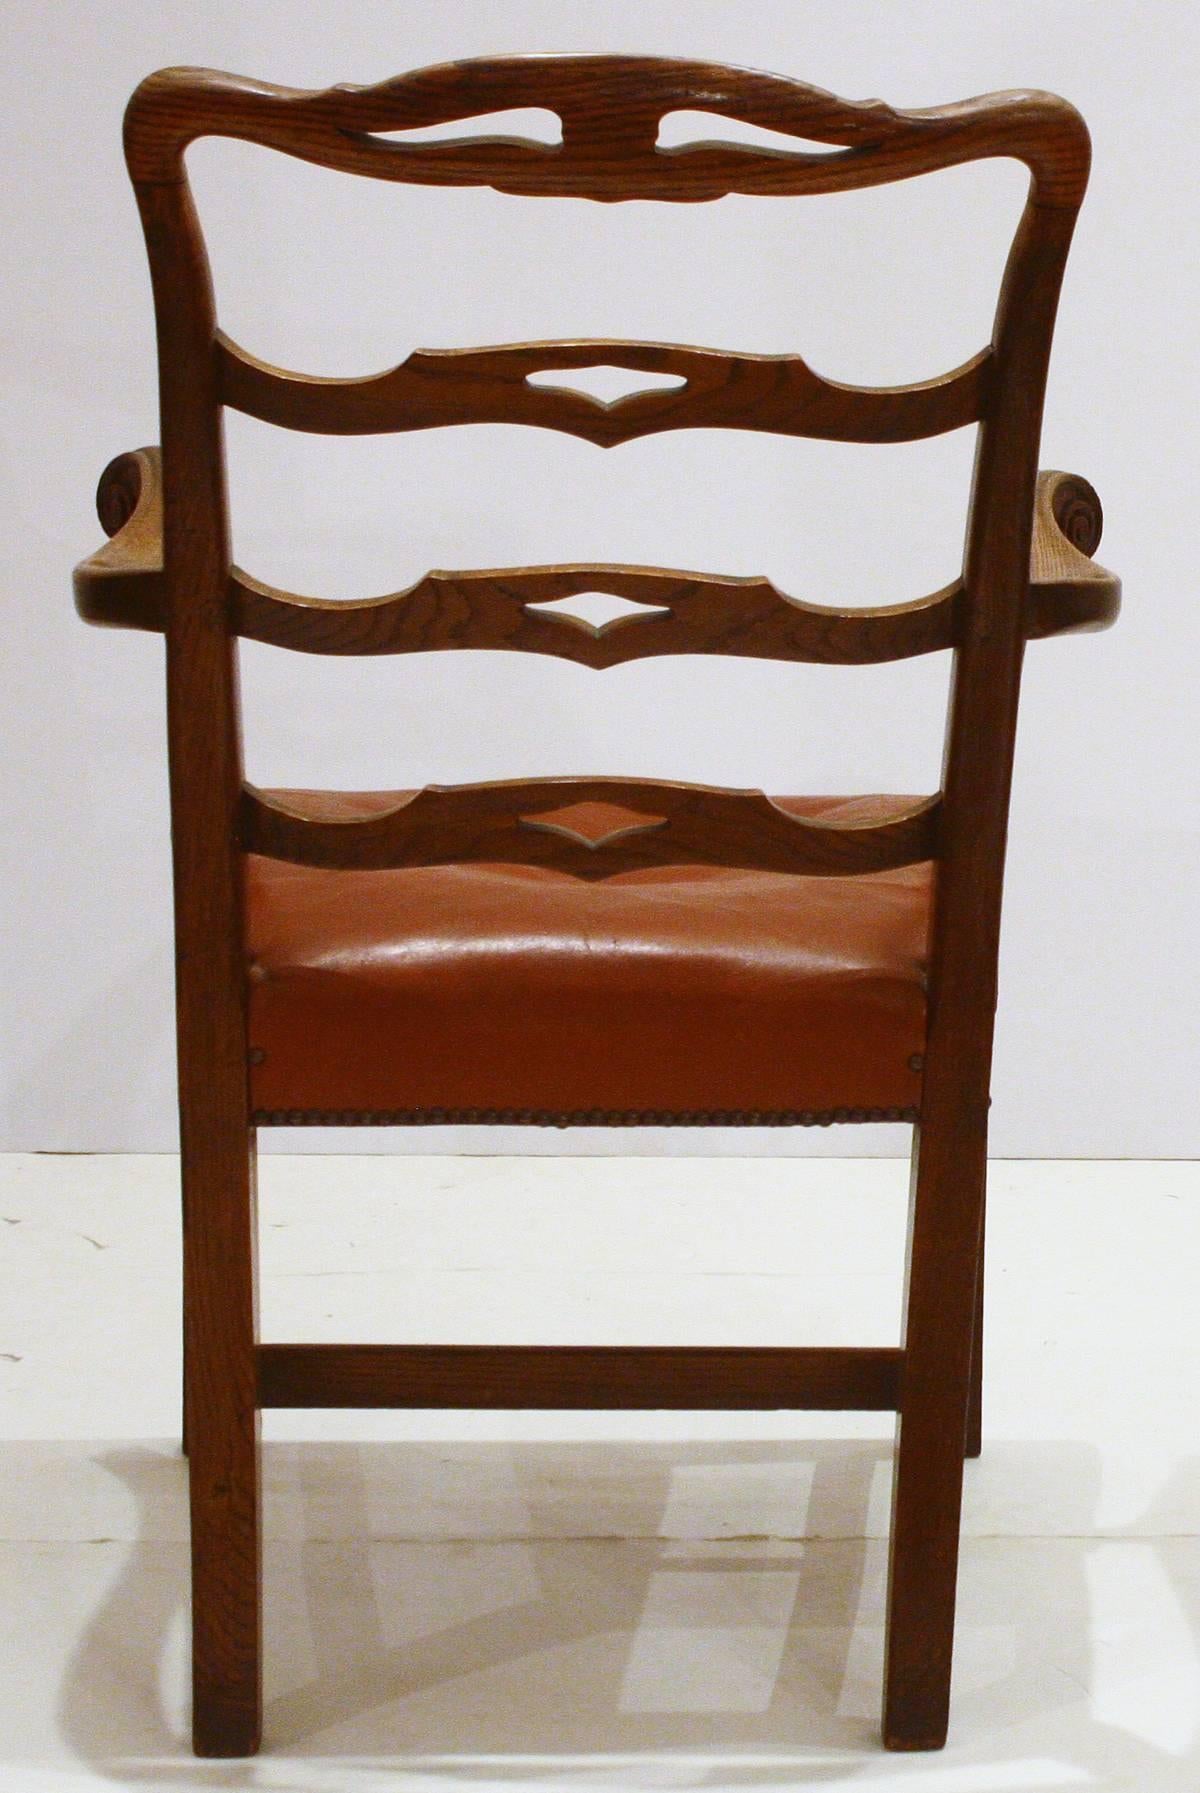 Hand-Carved English Host Chair / Ladderback Armchair with British Tan Saddle Leather Seat